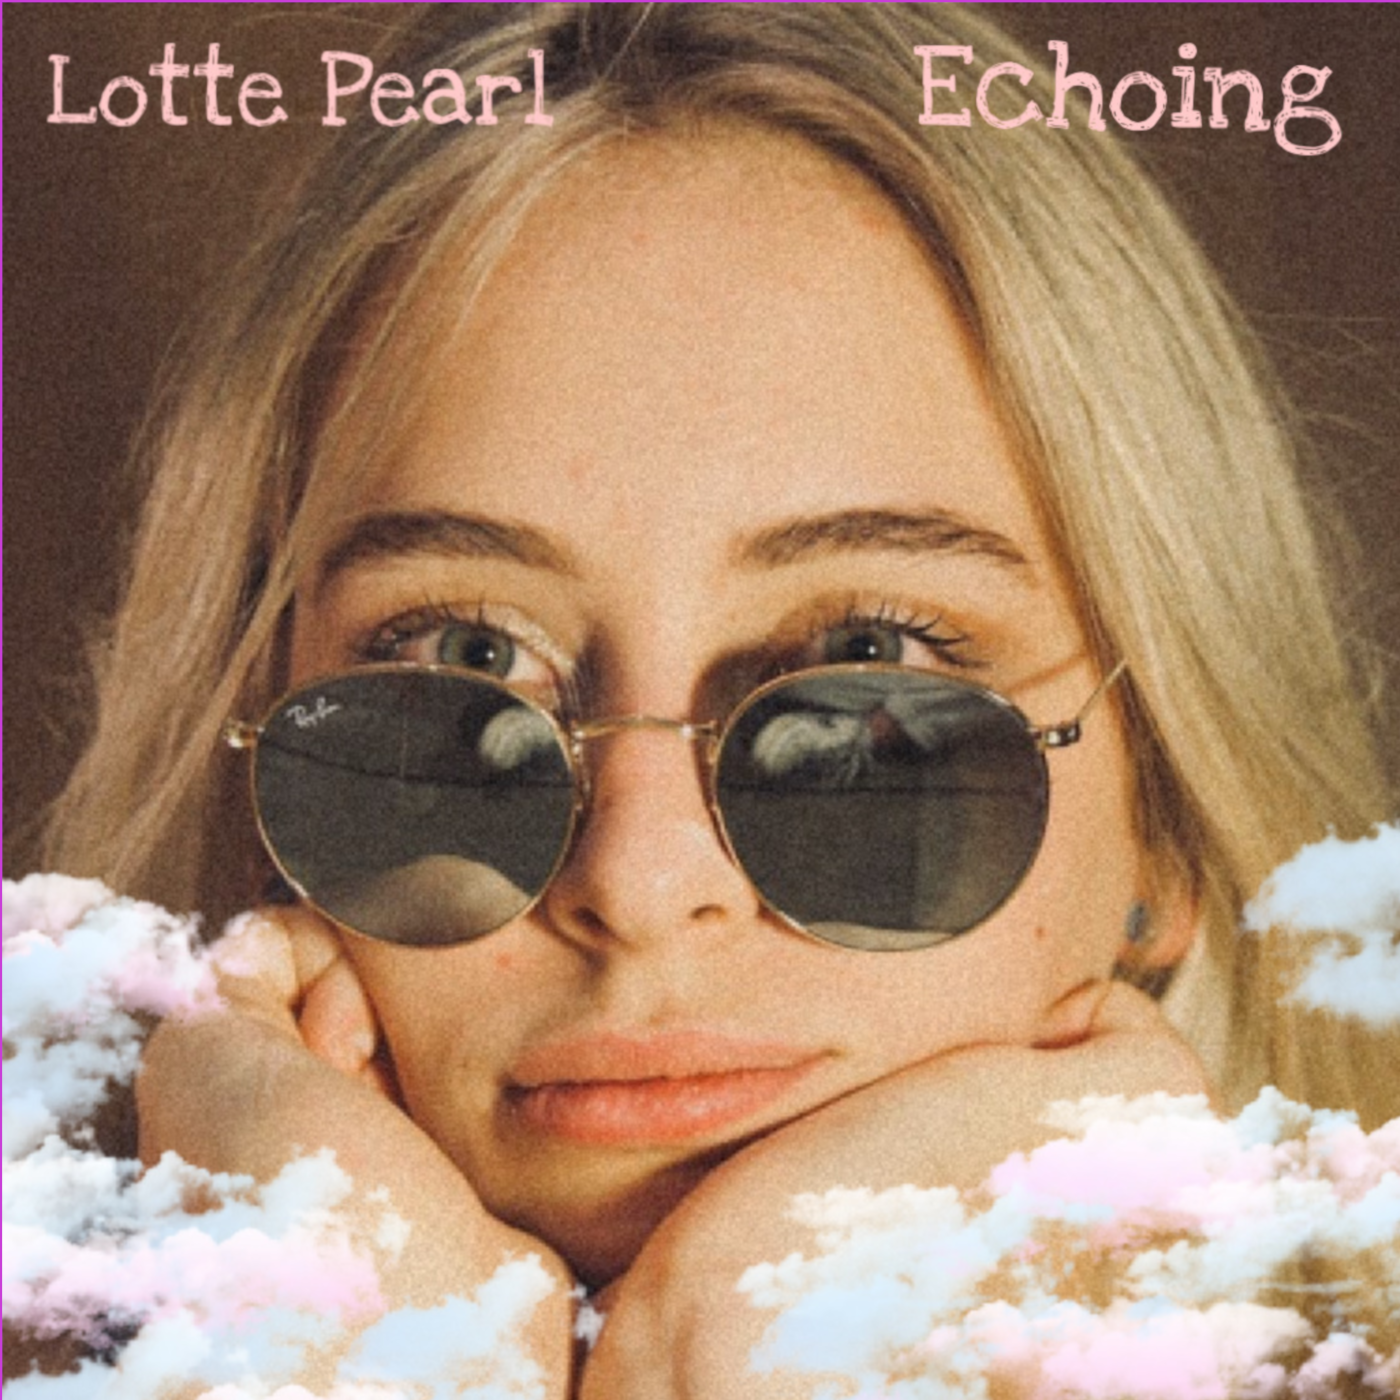 'Echoing' by Lotte Pearl